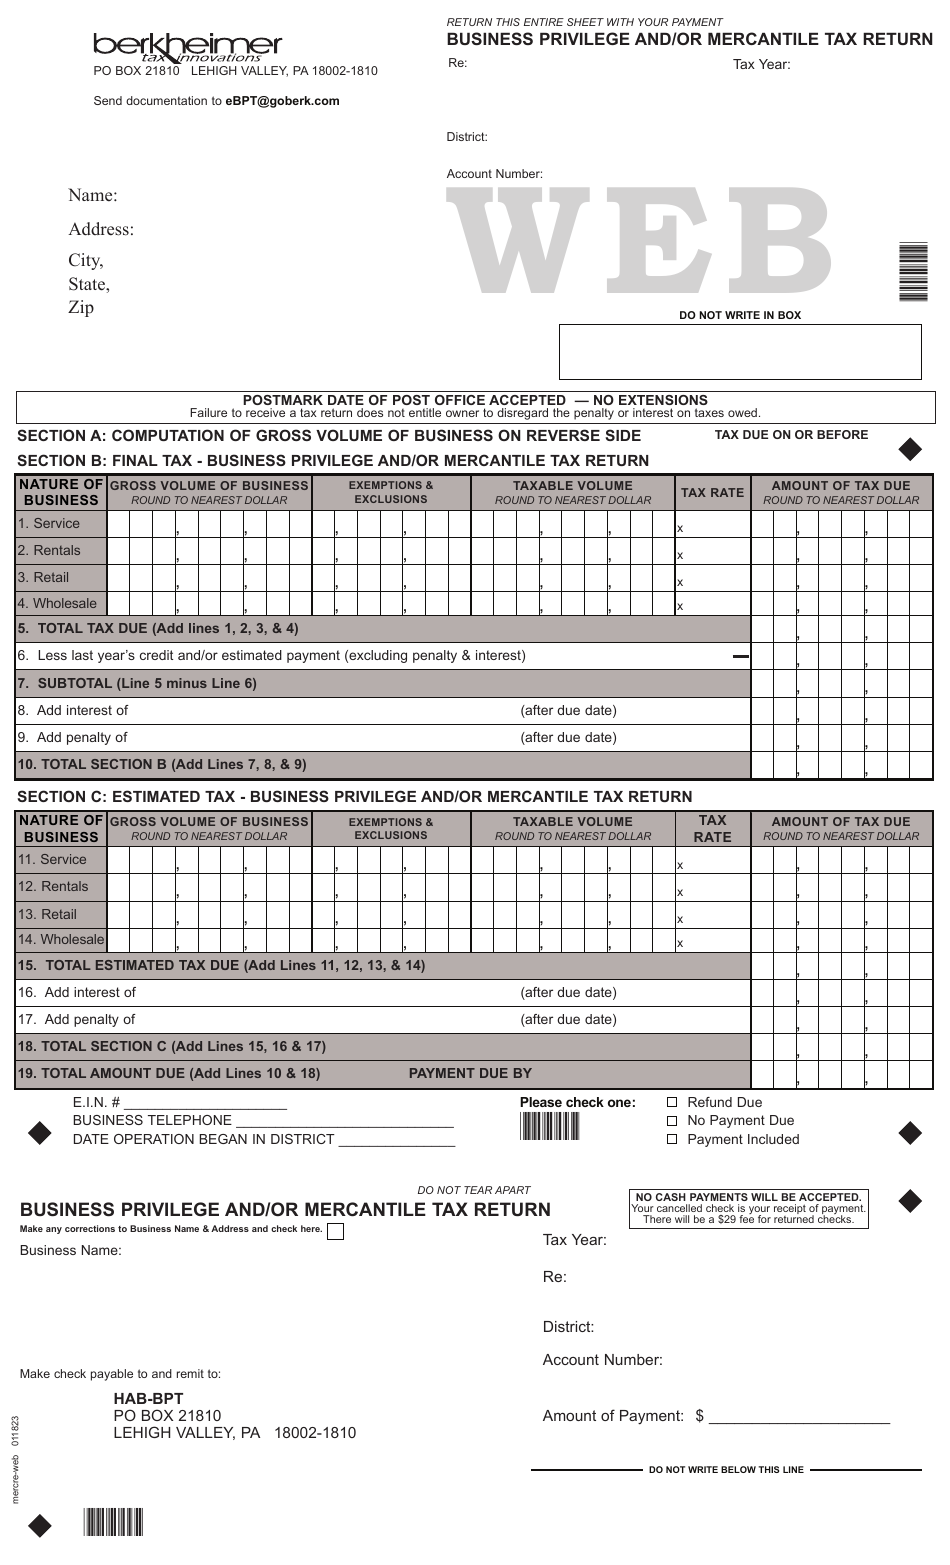 Business Privilege and / or Mercantile Tax Return - Pennsylvania, Page 1